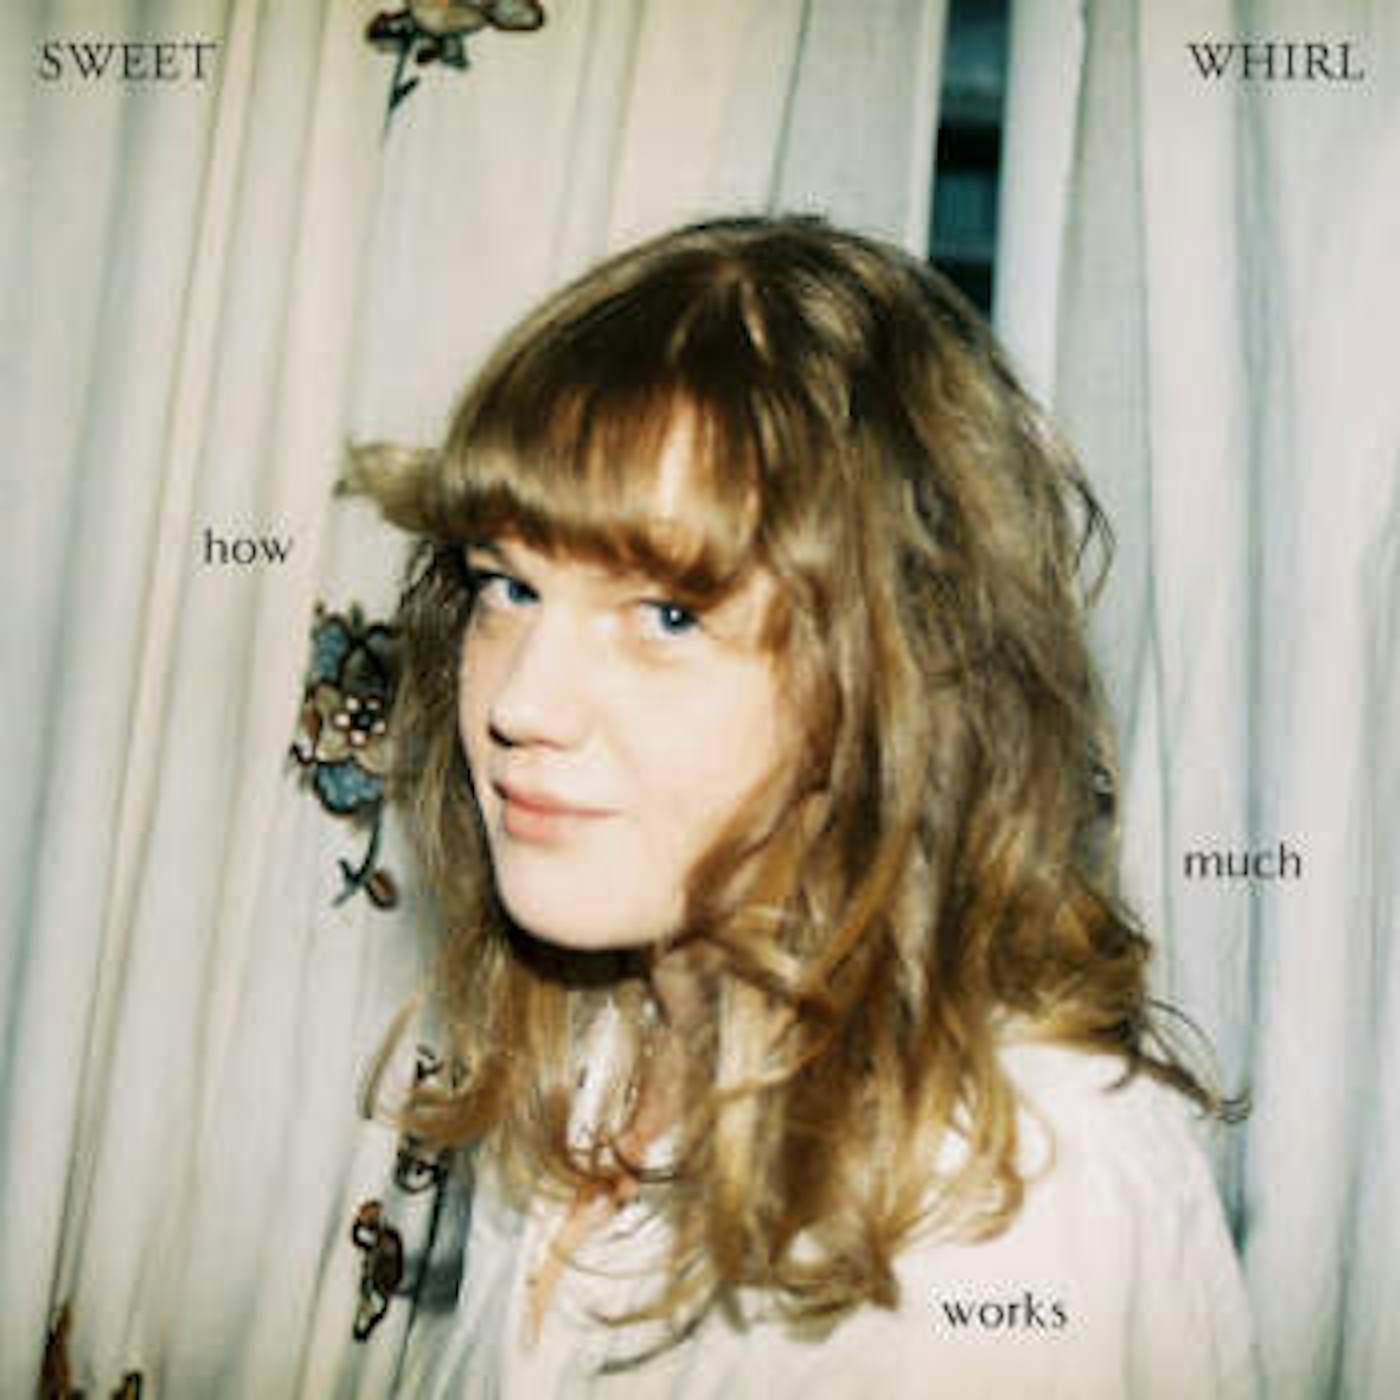 Sweet Whirl HOW MUCH WORKS (COLOR VINYL) Vinyl Record